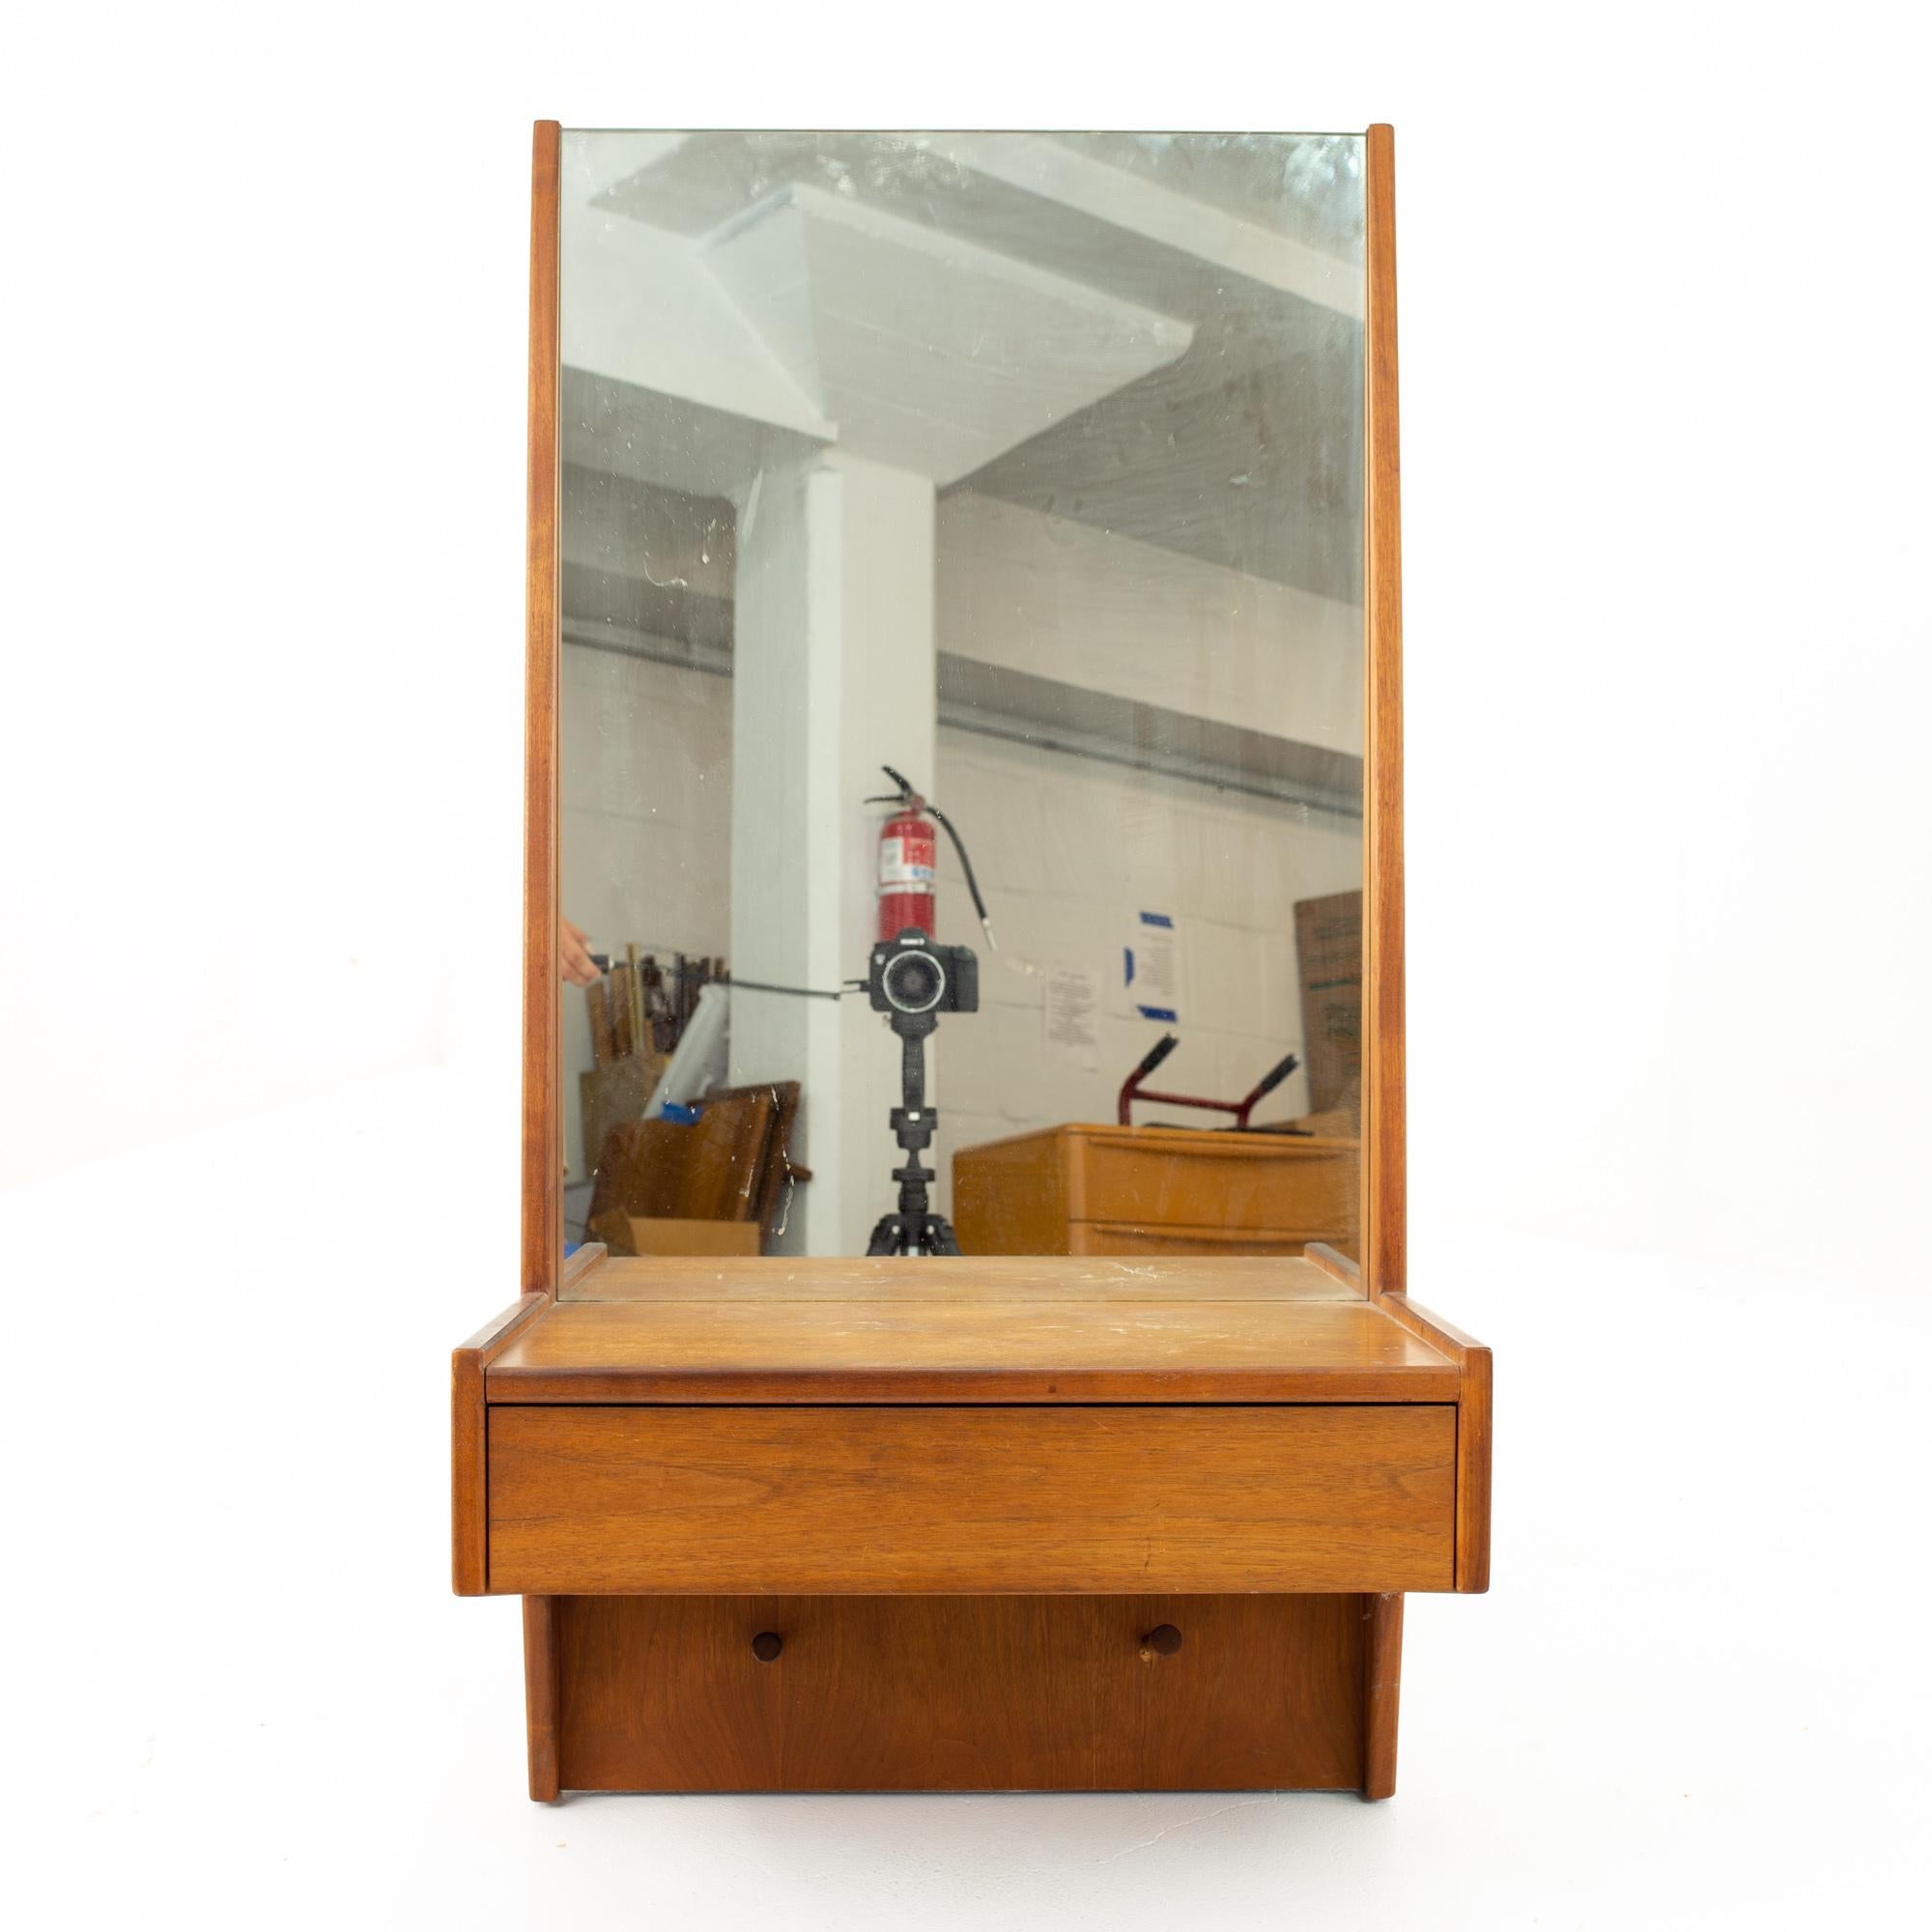 Glenn of California midcentury walnut entry mirror

Mirror measures: 22 wide x 13.5 deep x 42.5 high

This price includes getting this piece in what we call restored vintage condition. That means the piece is permanently fixed upon purchase so